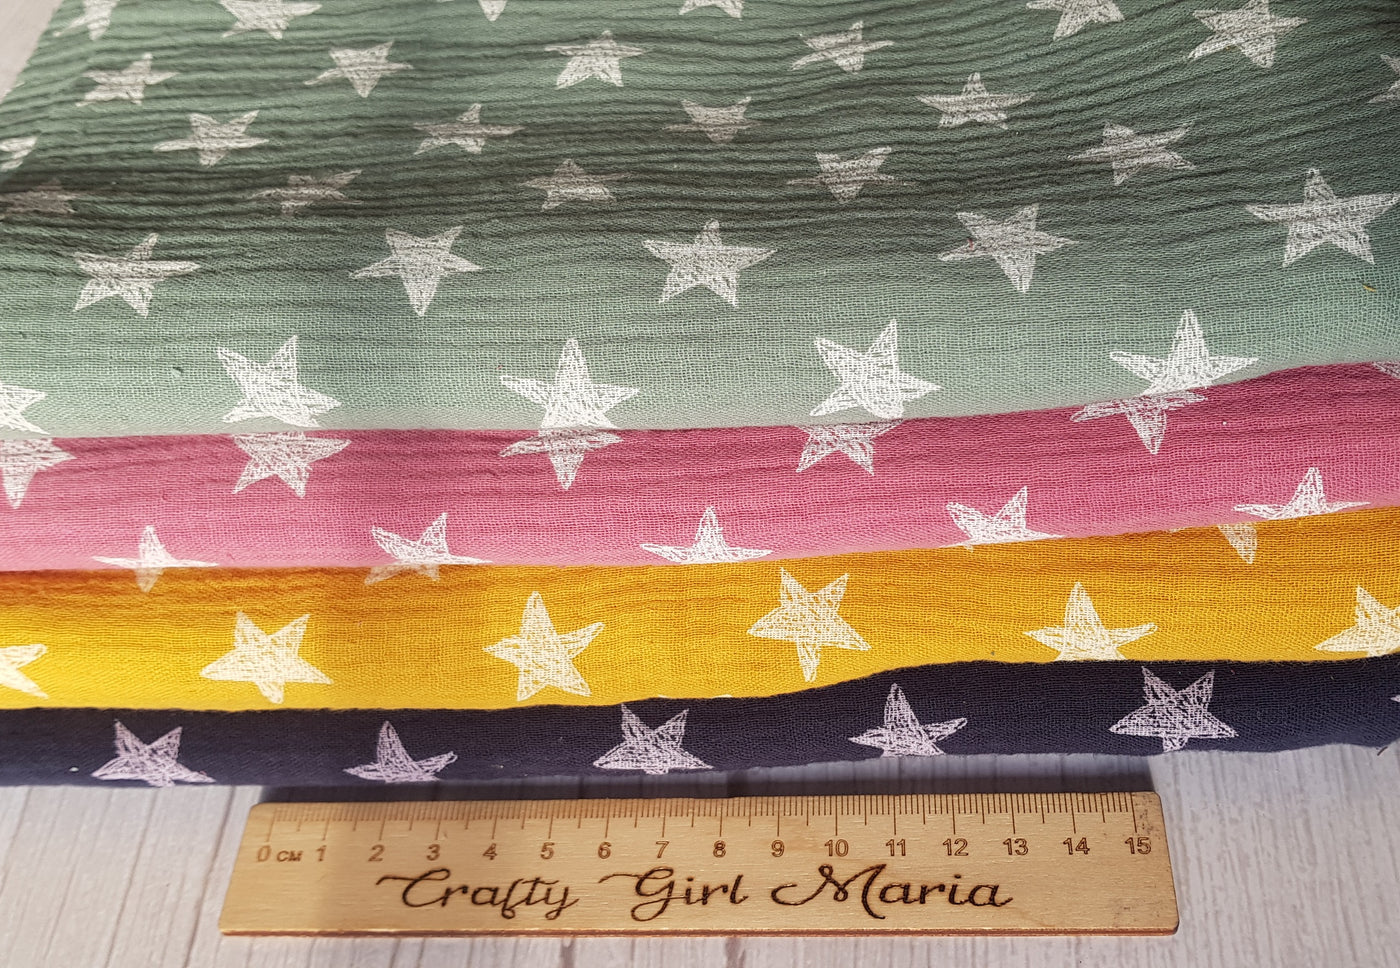 Star Double Gauze Muslin Cotton Fabric.  By the half metre. Sage green, navy blue and dusky pink.